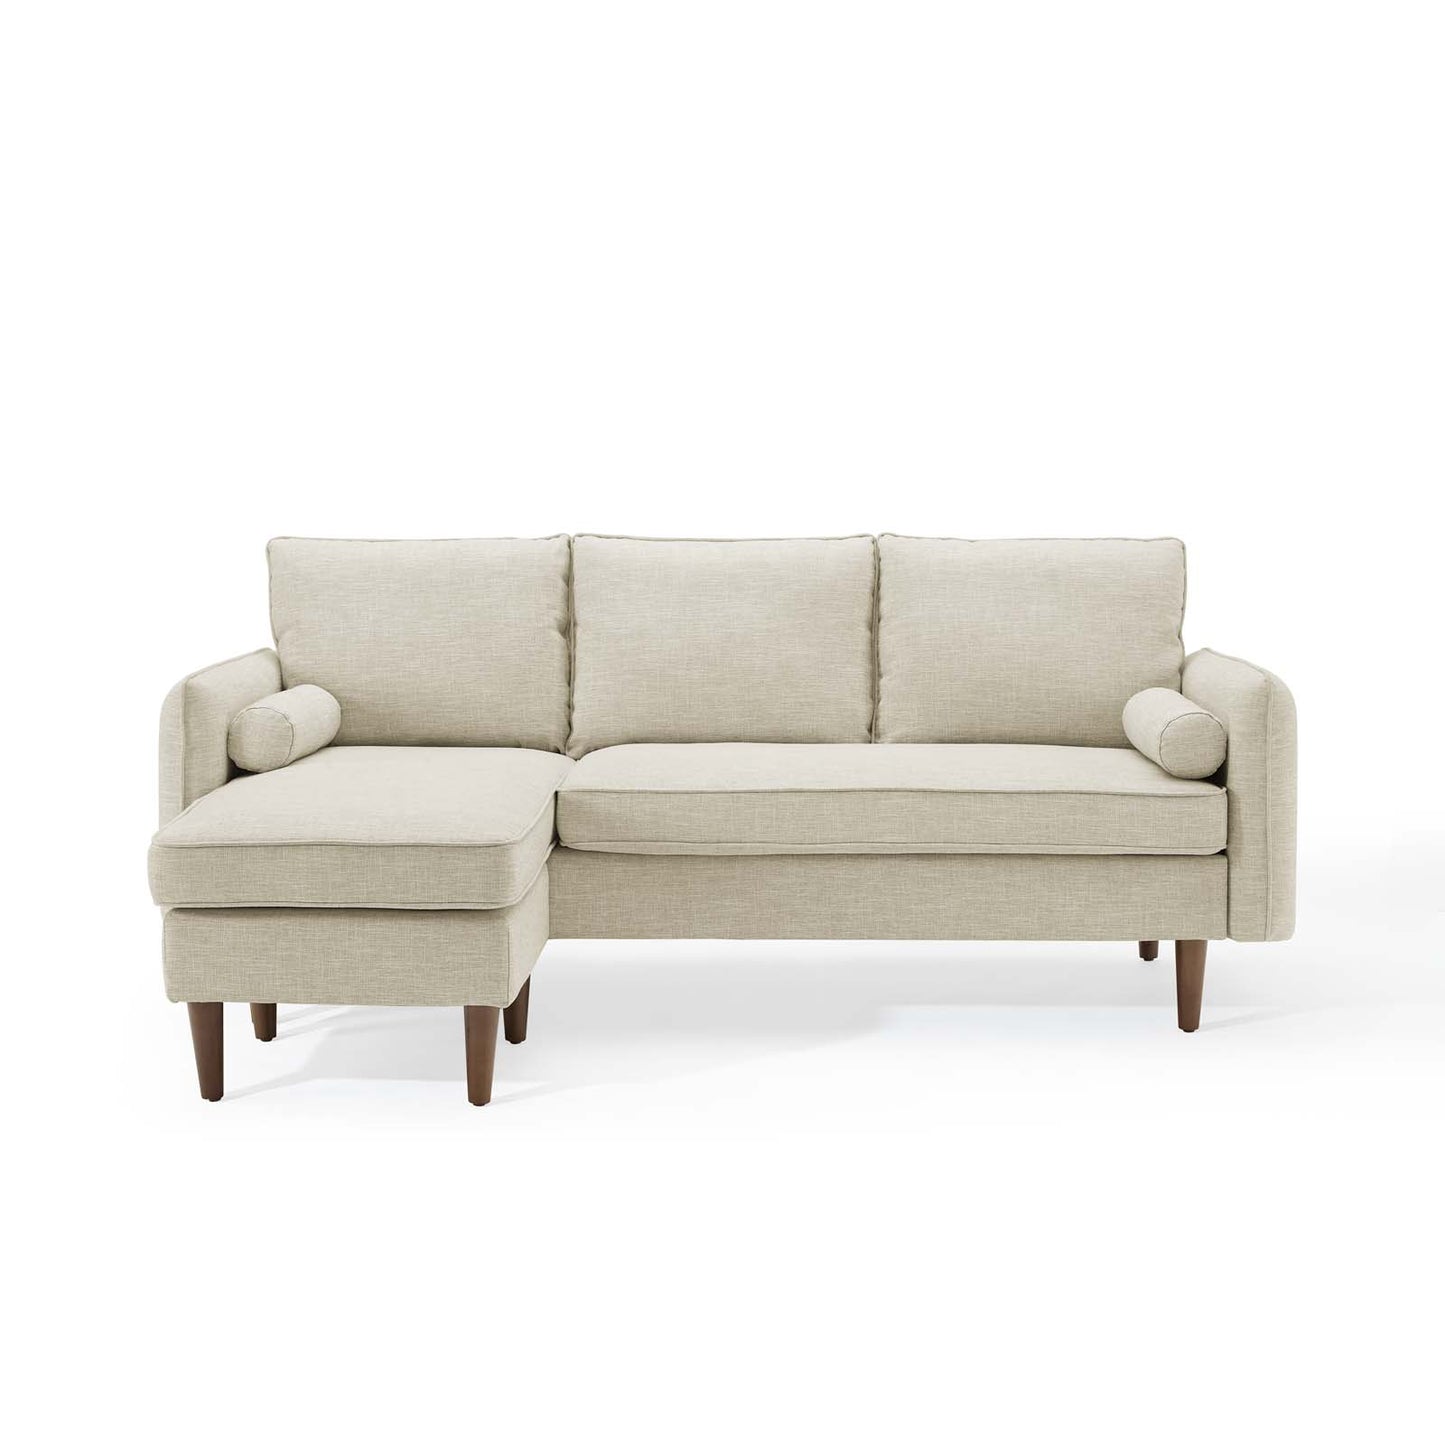 Revive Upholstered Right or Left Sectional Sofa Beige EEI-3867-BEI